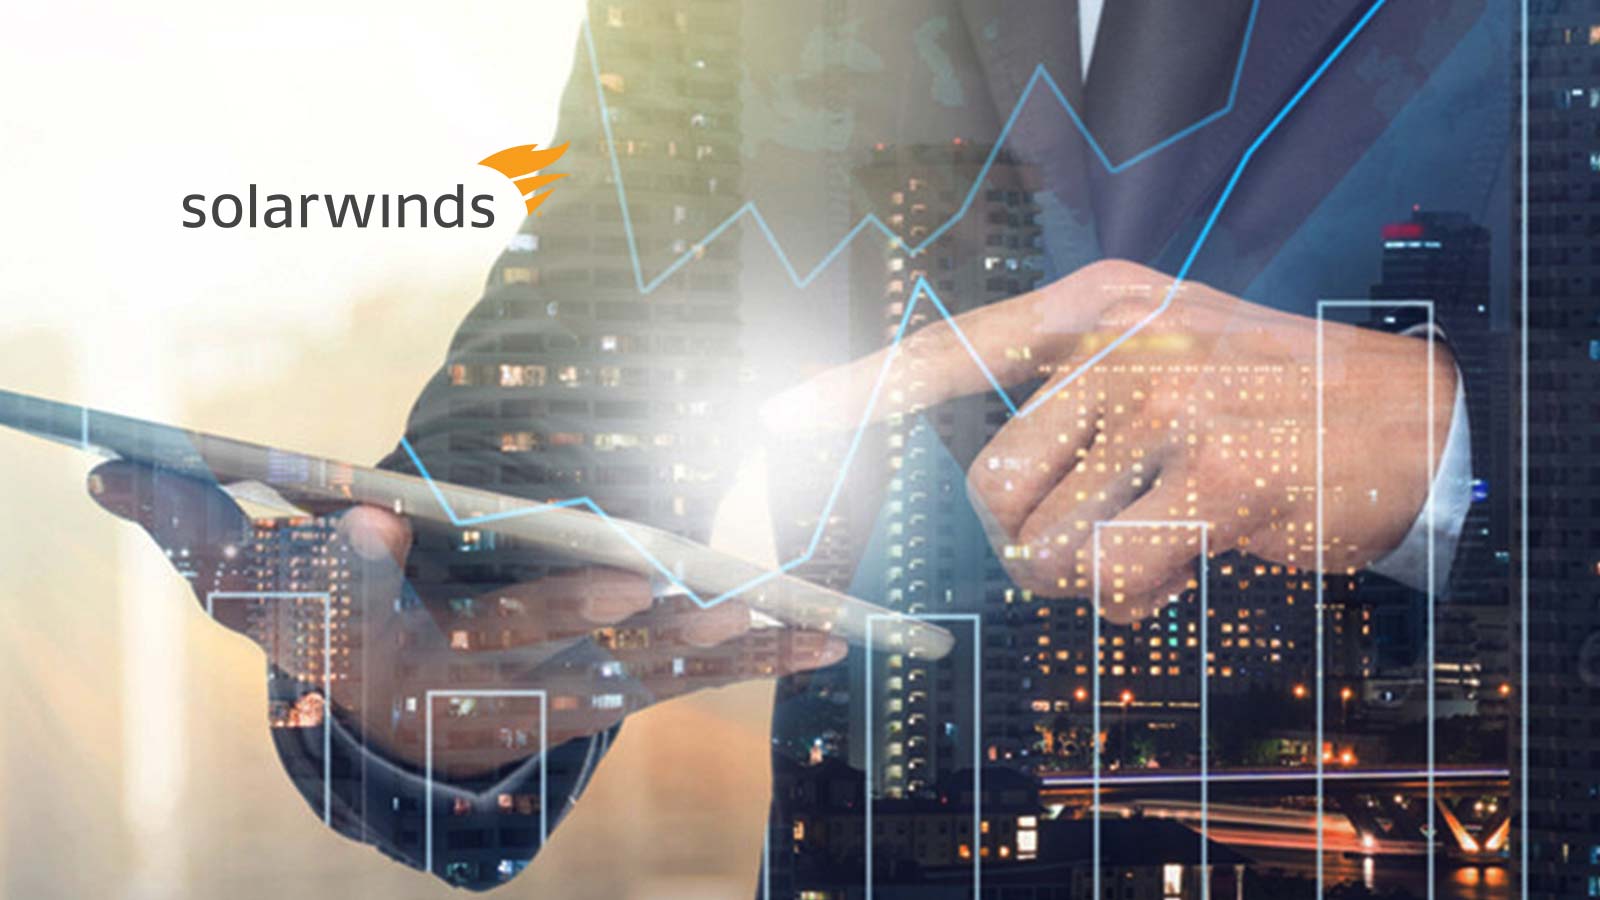 Hospital in the Netherlands selects Adfontes Software for SolarWinds IT Operation Management (ITOM) Software & Services